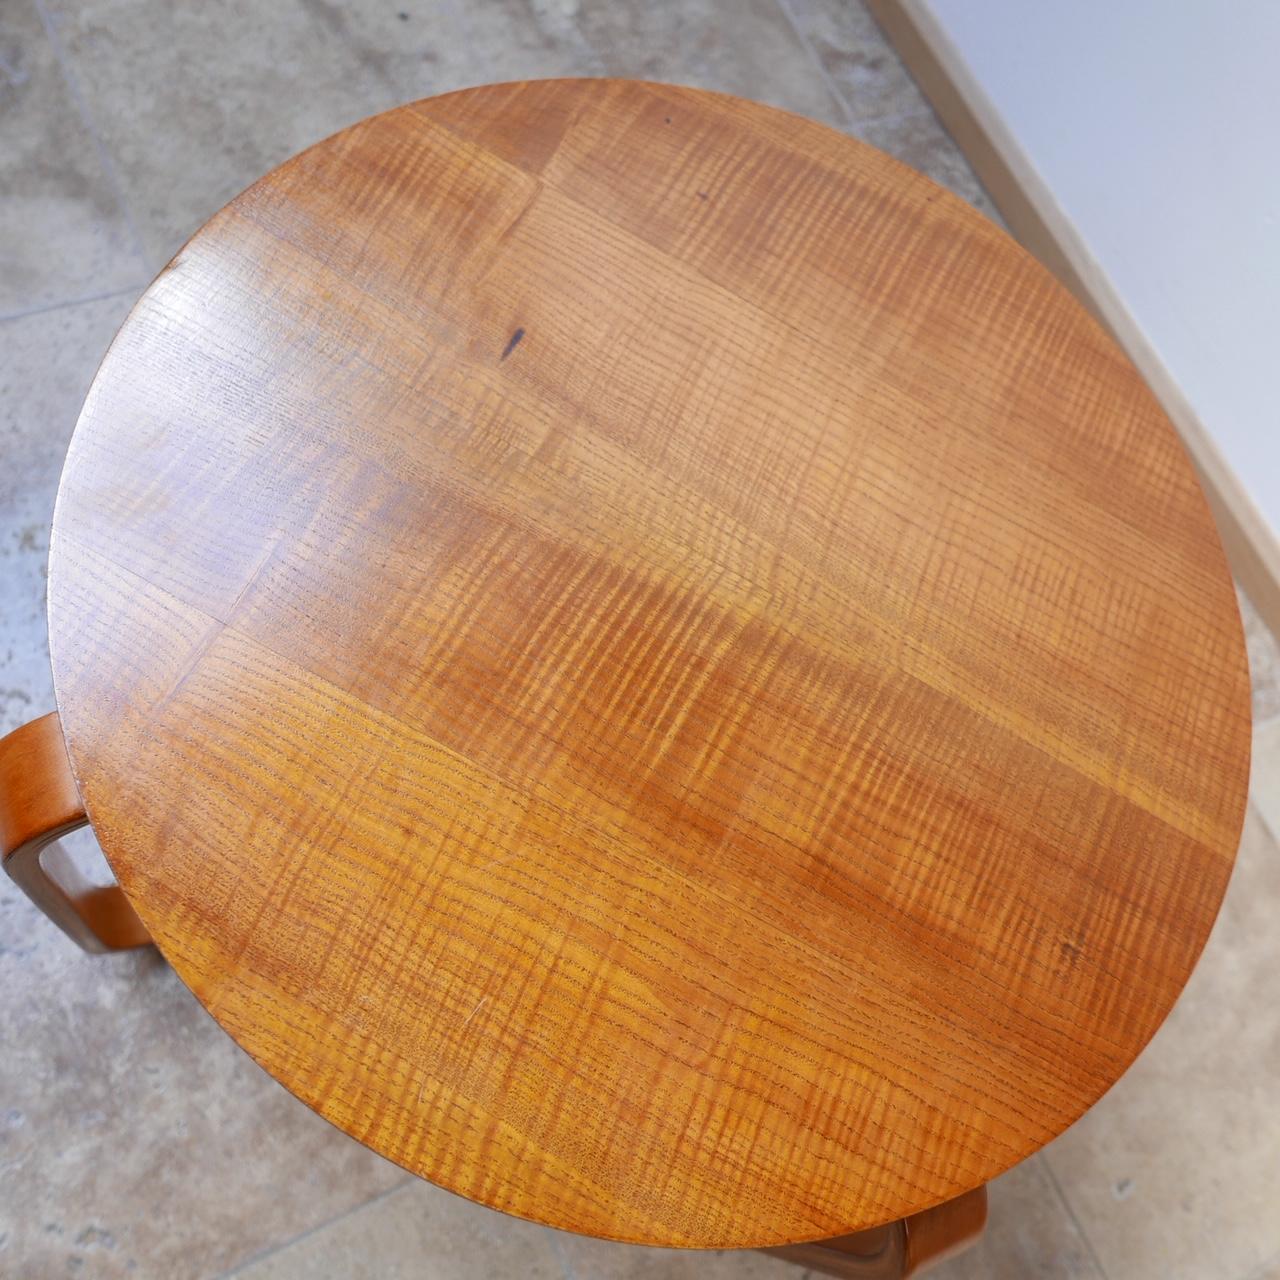 An elegant coffee table by Giuseppe Pagano.

Italy, circa 1942.

Minimalist curved design, formed from layers of plywood.

  

Price is for the coffee table only.

Dimensions: 50 H x 69 D x 69 W in cm.
  